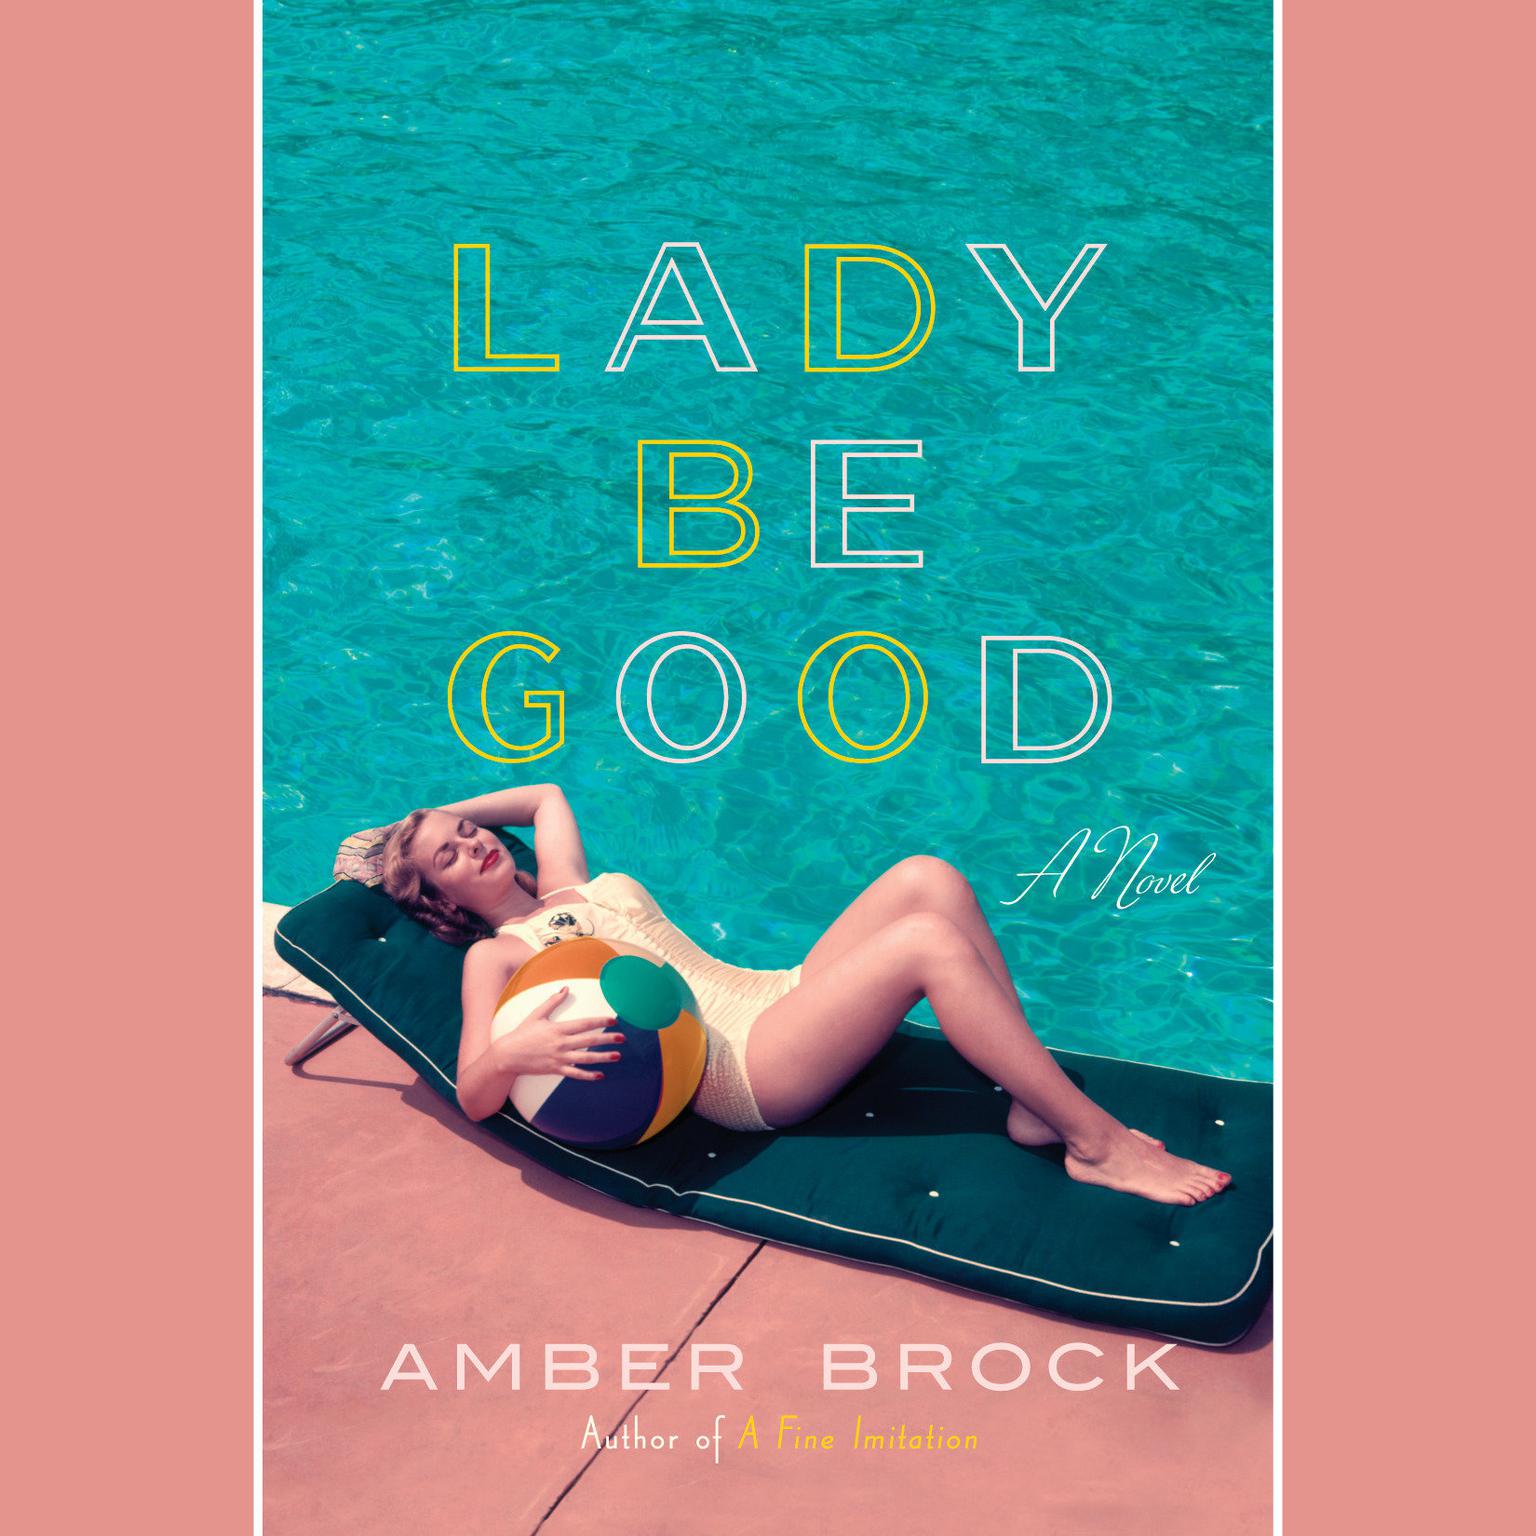 Lady Be Good: A Novel Audiobook, by Amber Brock